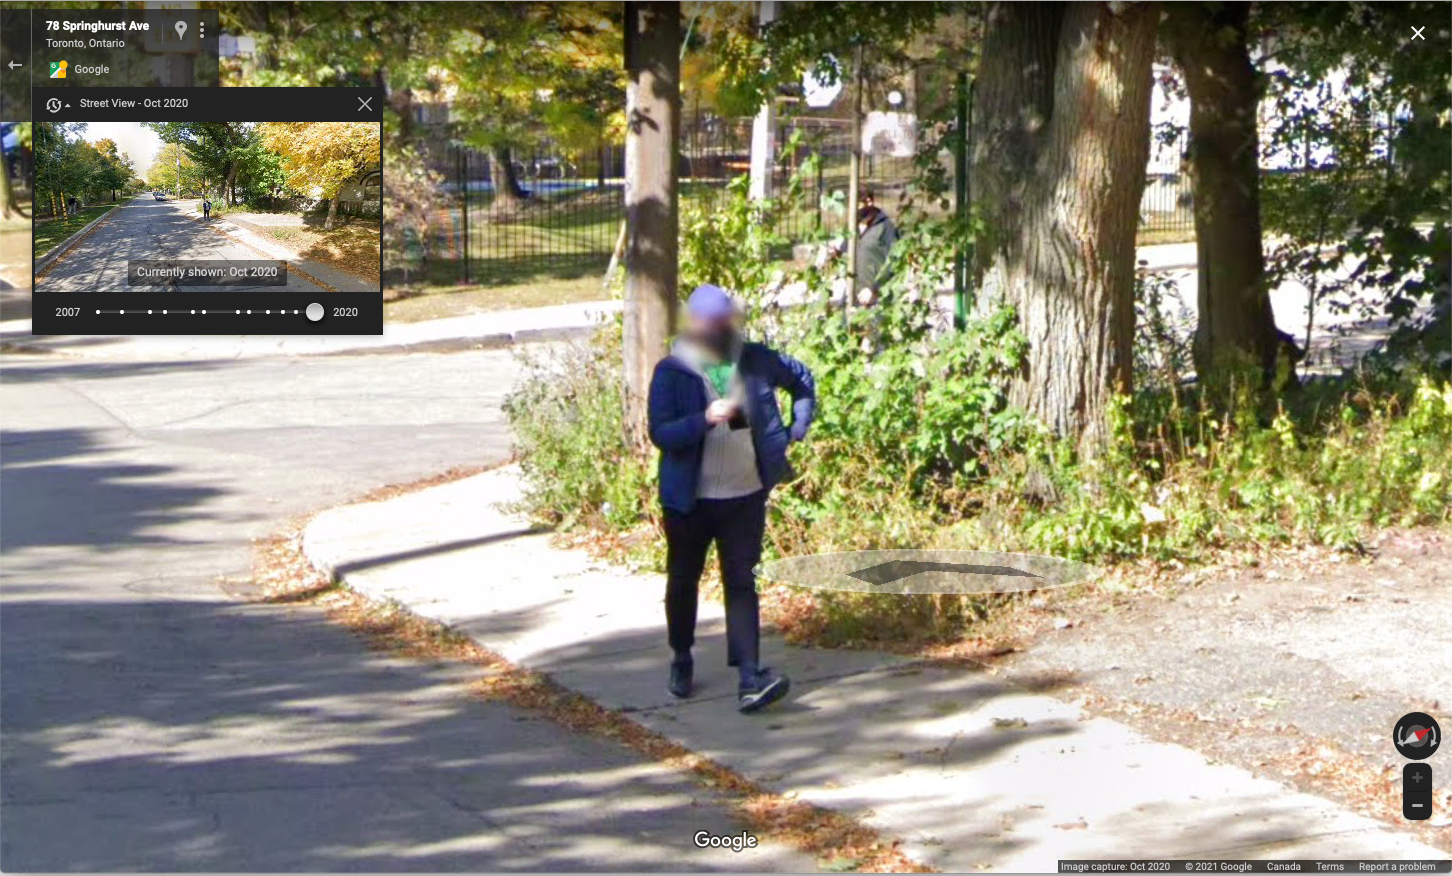 google streetview from October 2020